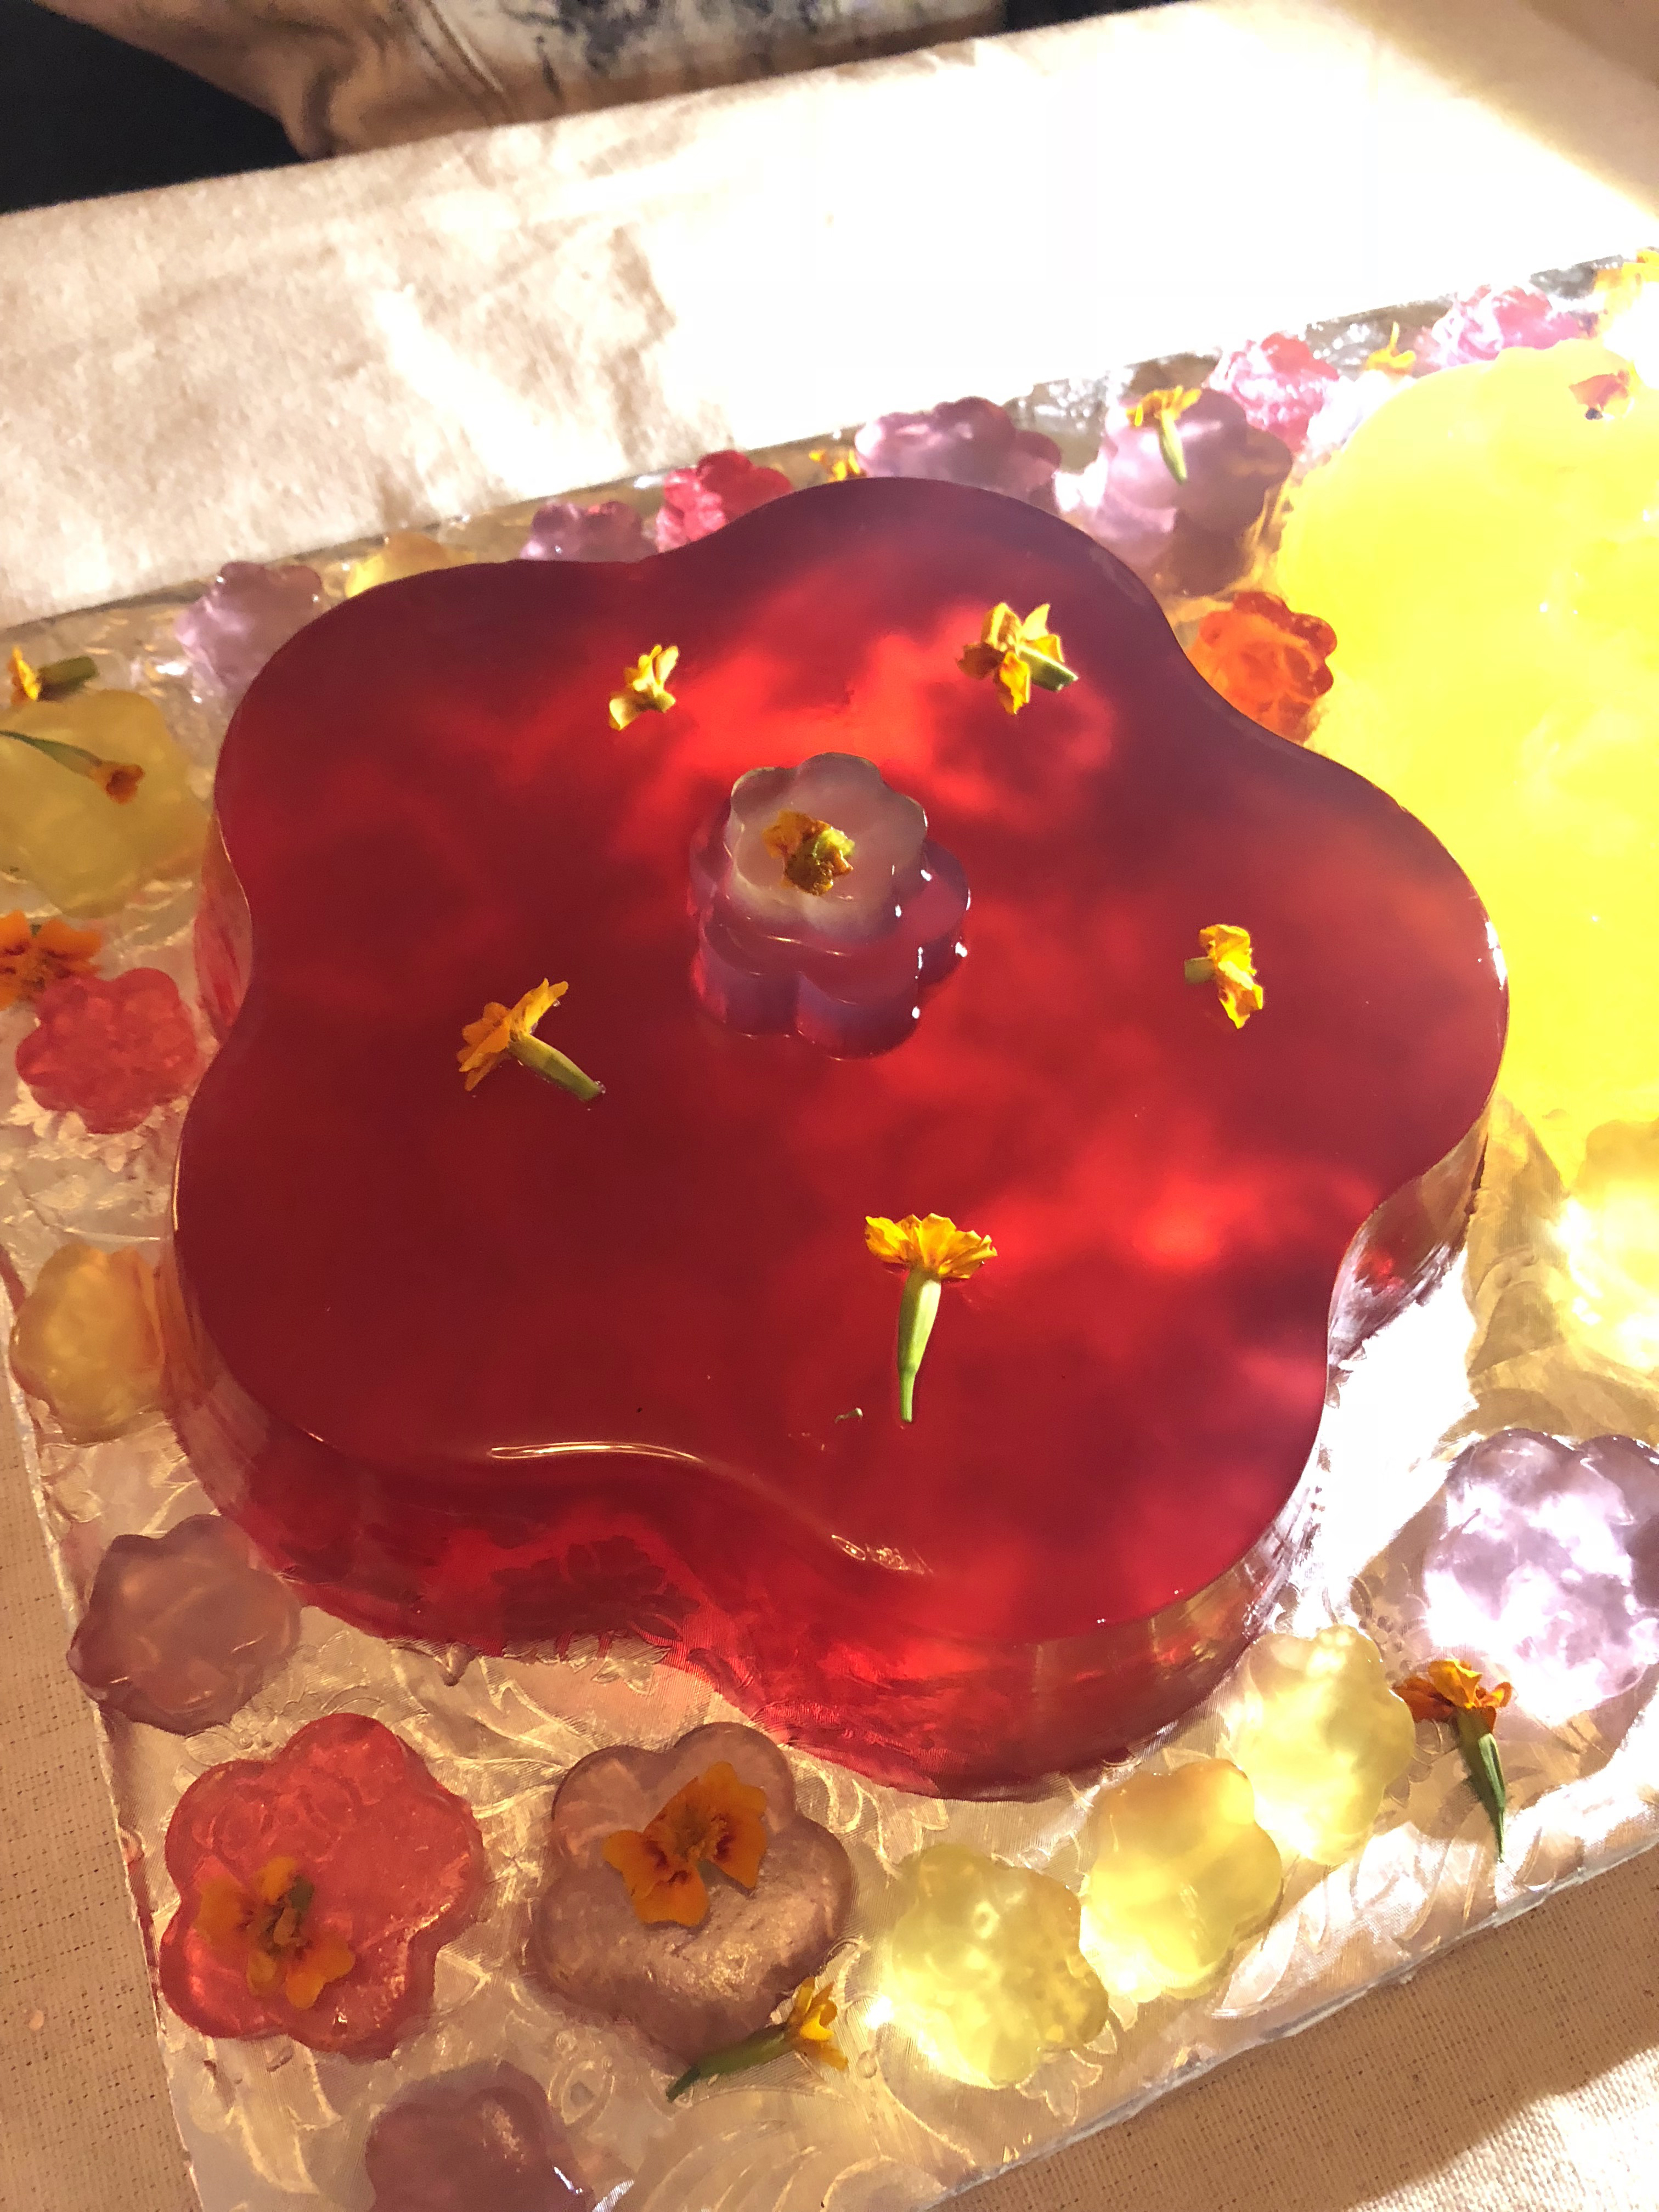 Detail of a brightly colored red jello cake in the shape of a flower on an alliuminium tray